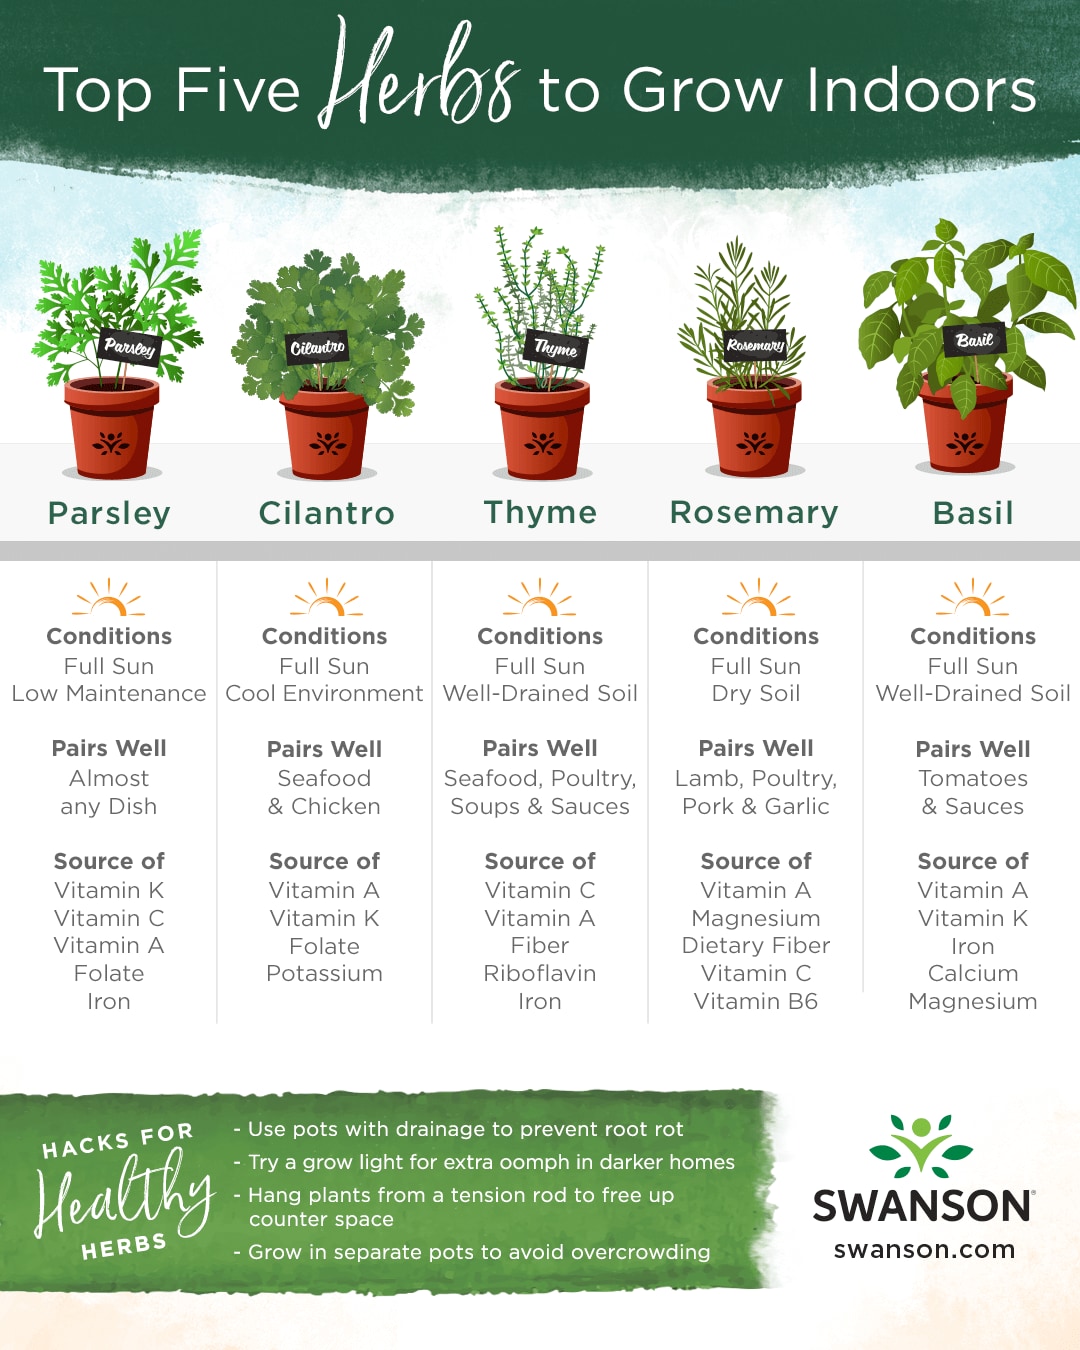 Image of herbs and ideal conditions